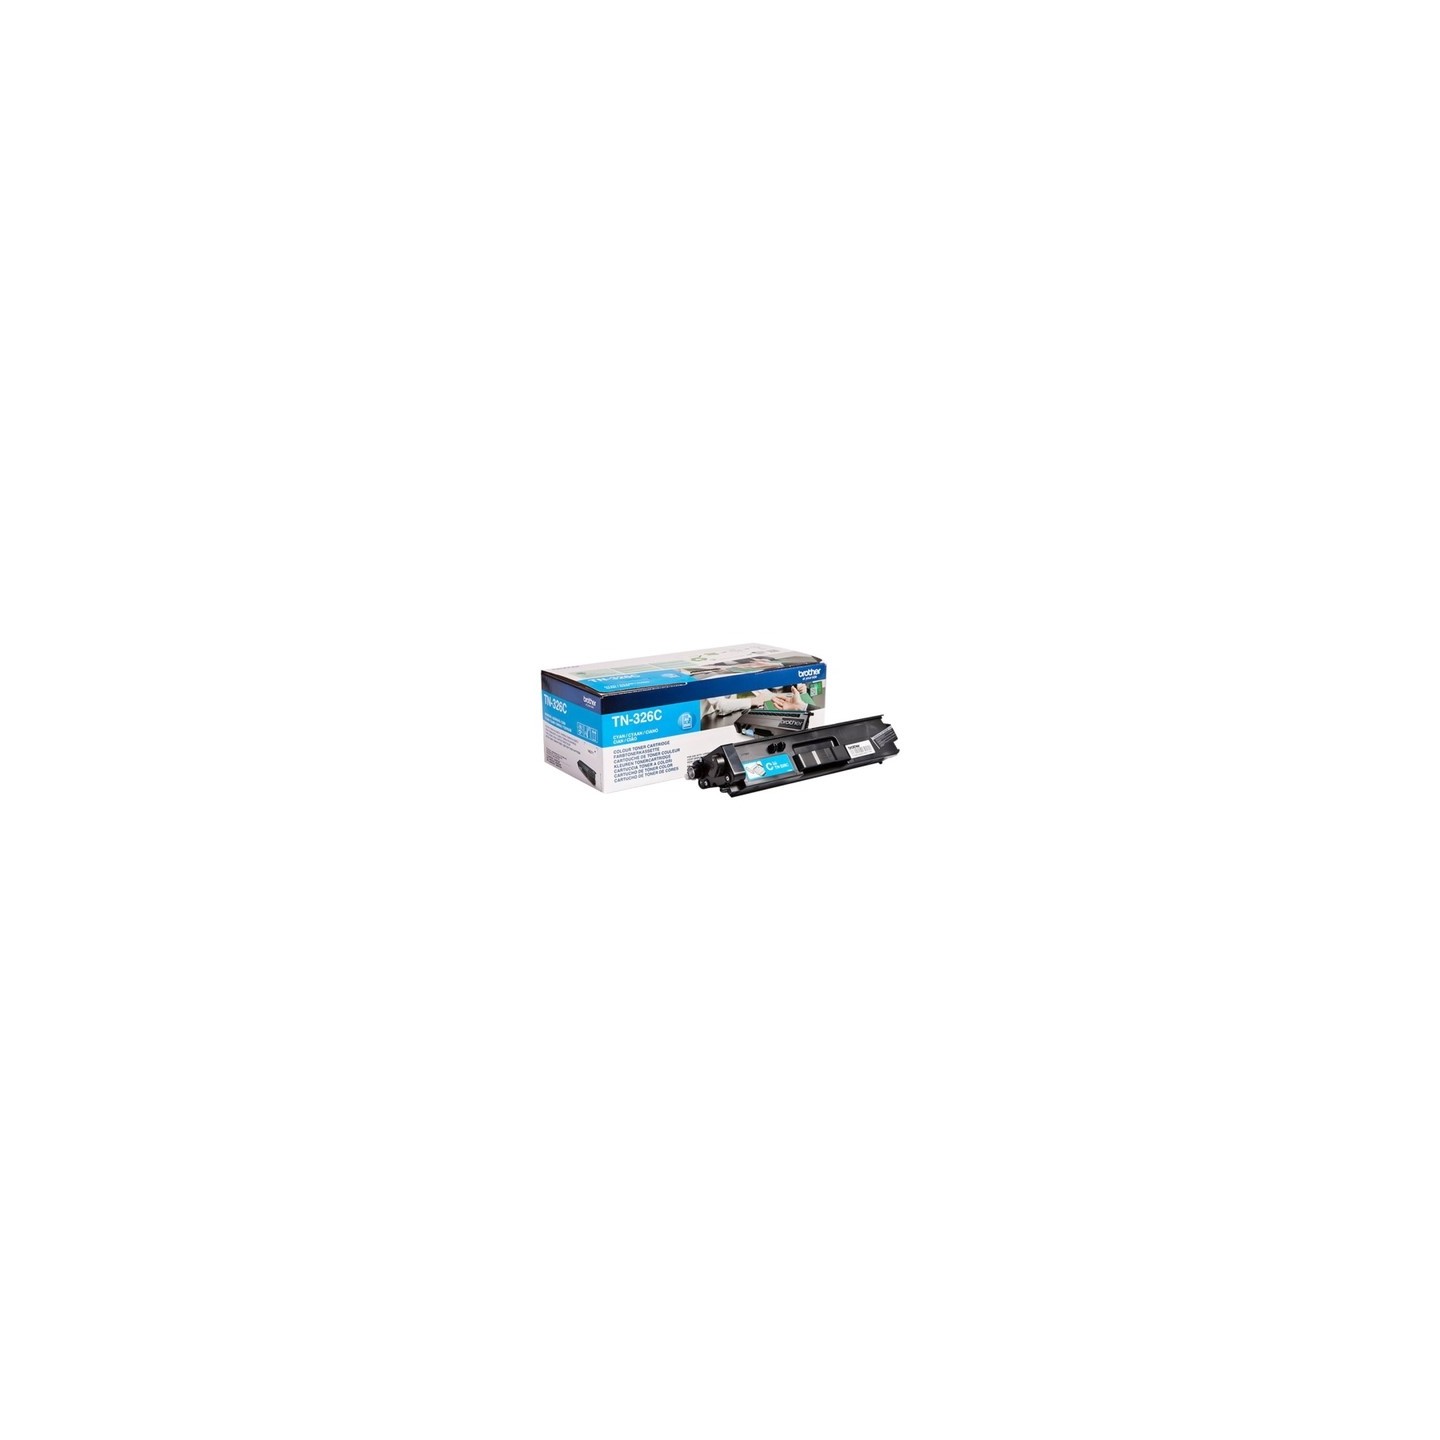 Toner authentique Brother TN-326 - Cyan